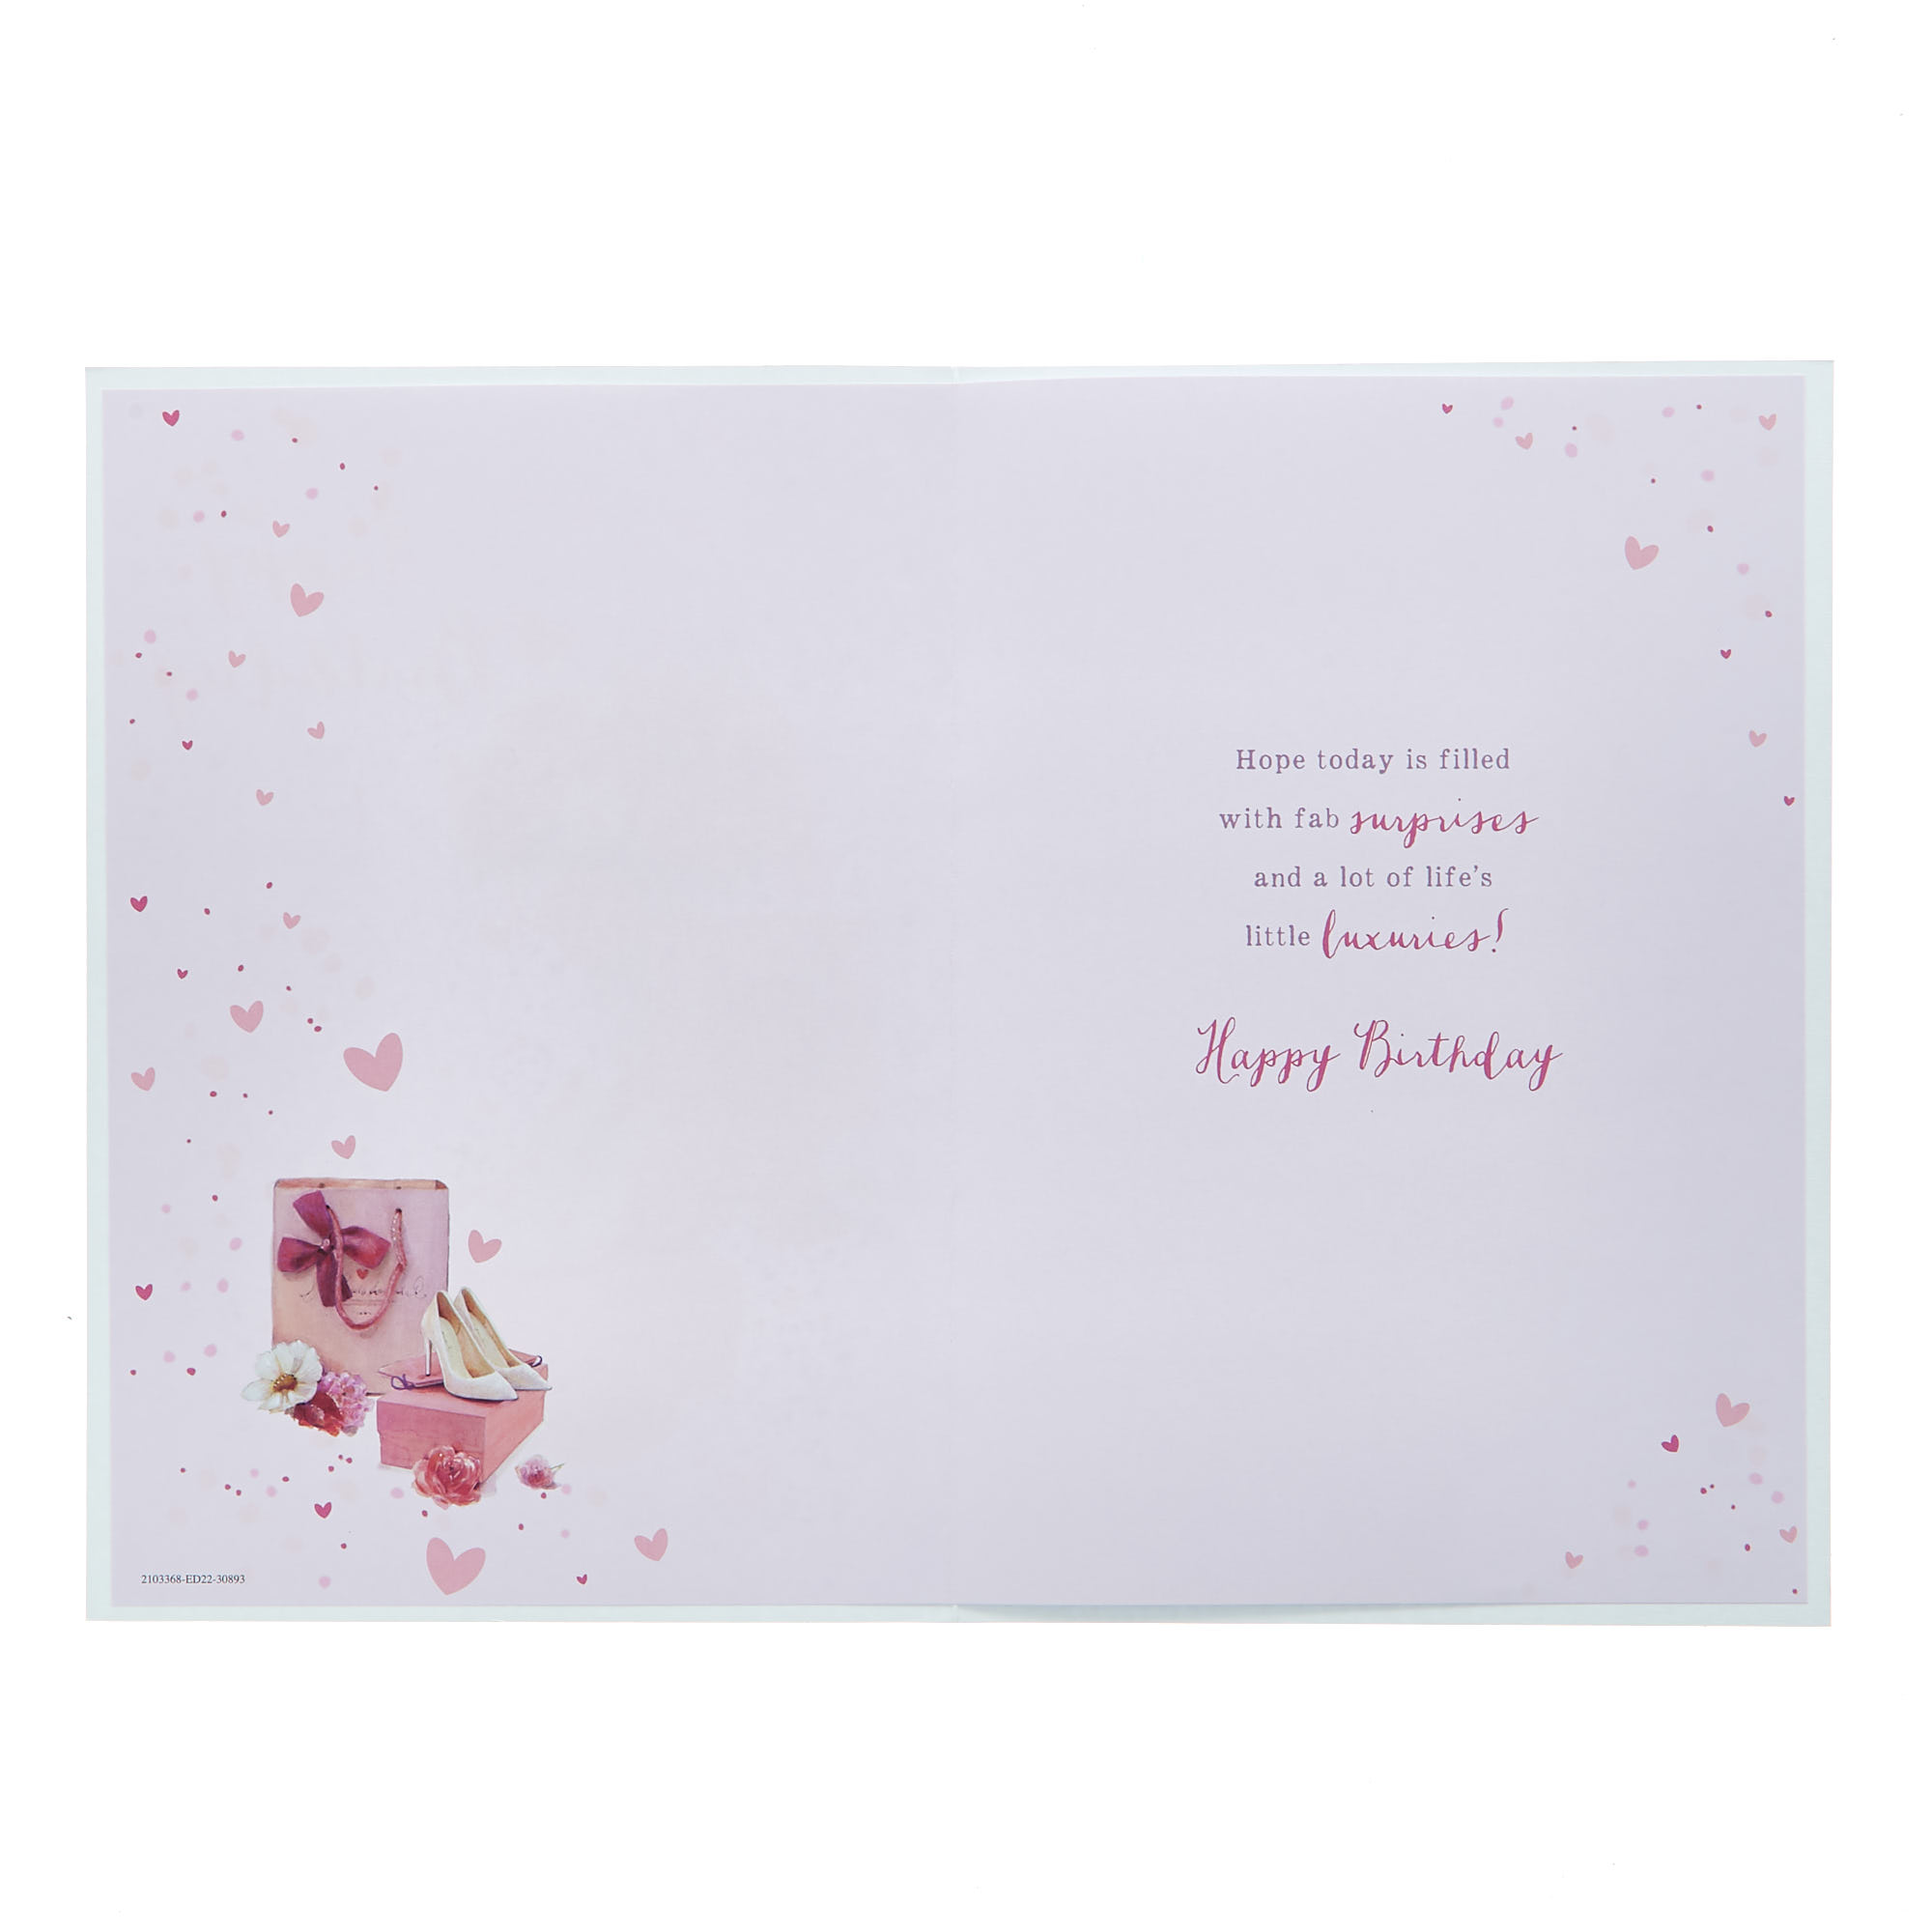 Birthday Card - Any Recipient Shoes & Flowers